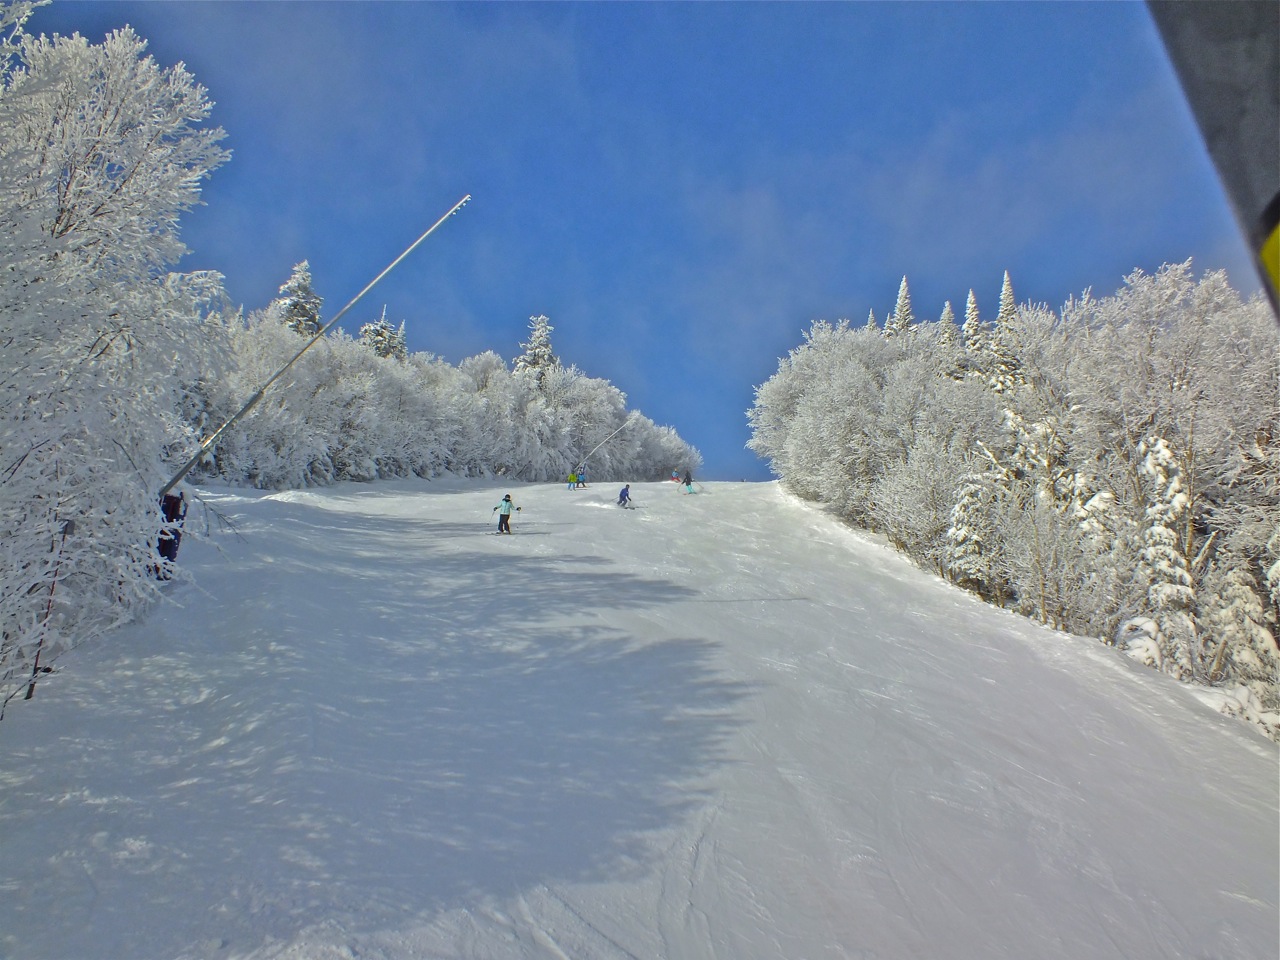 www.tremblant360.com photo. All rights reserved.